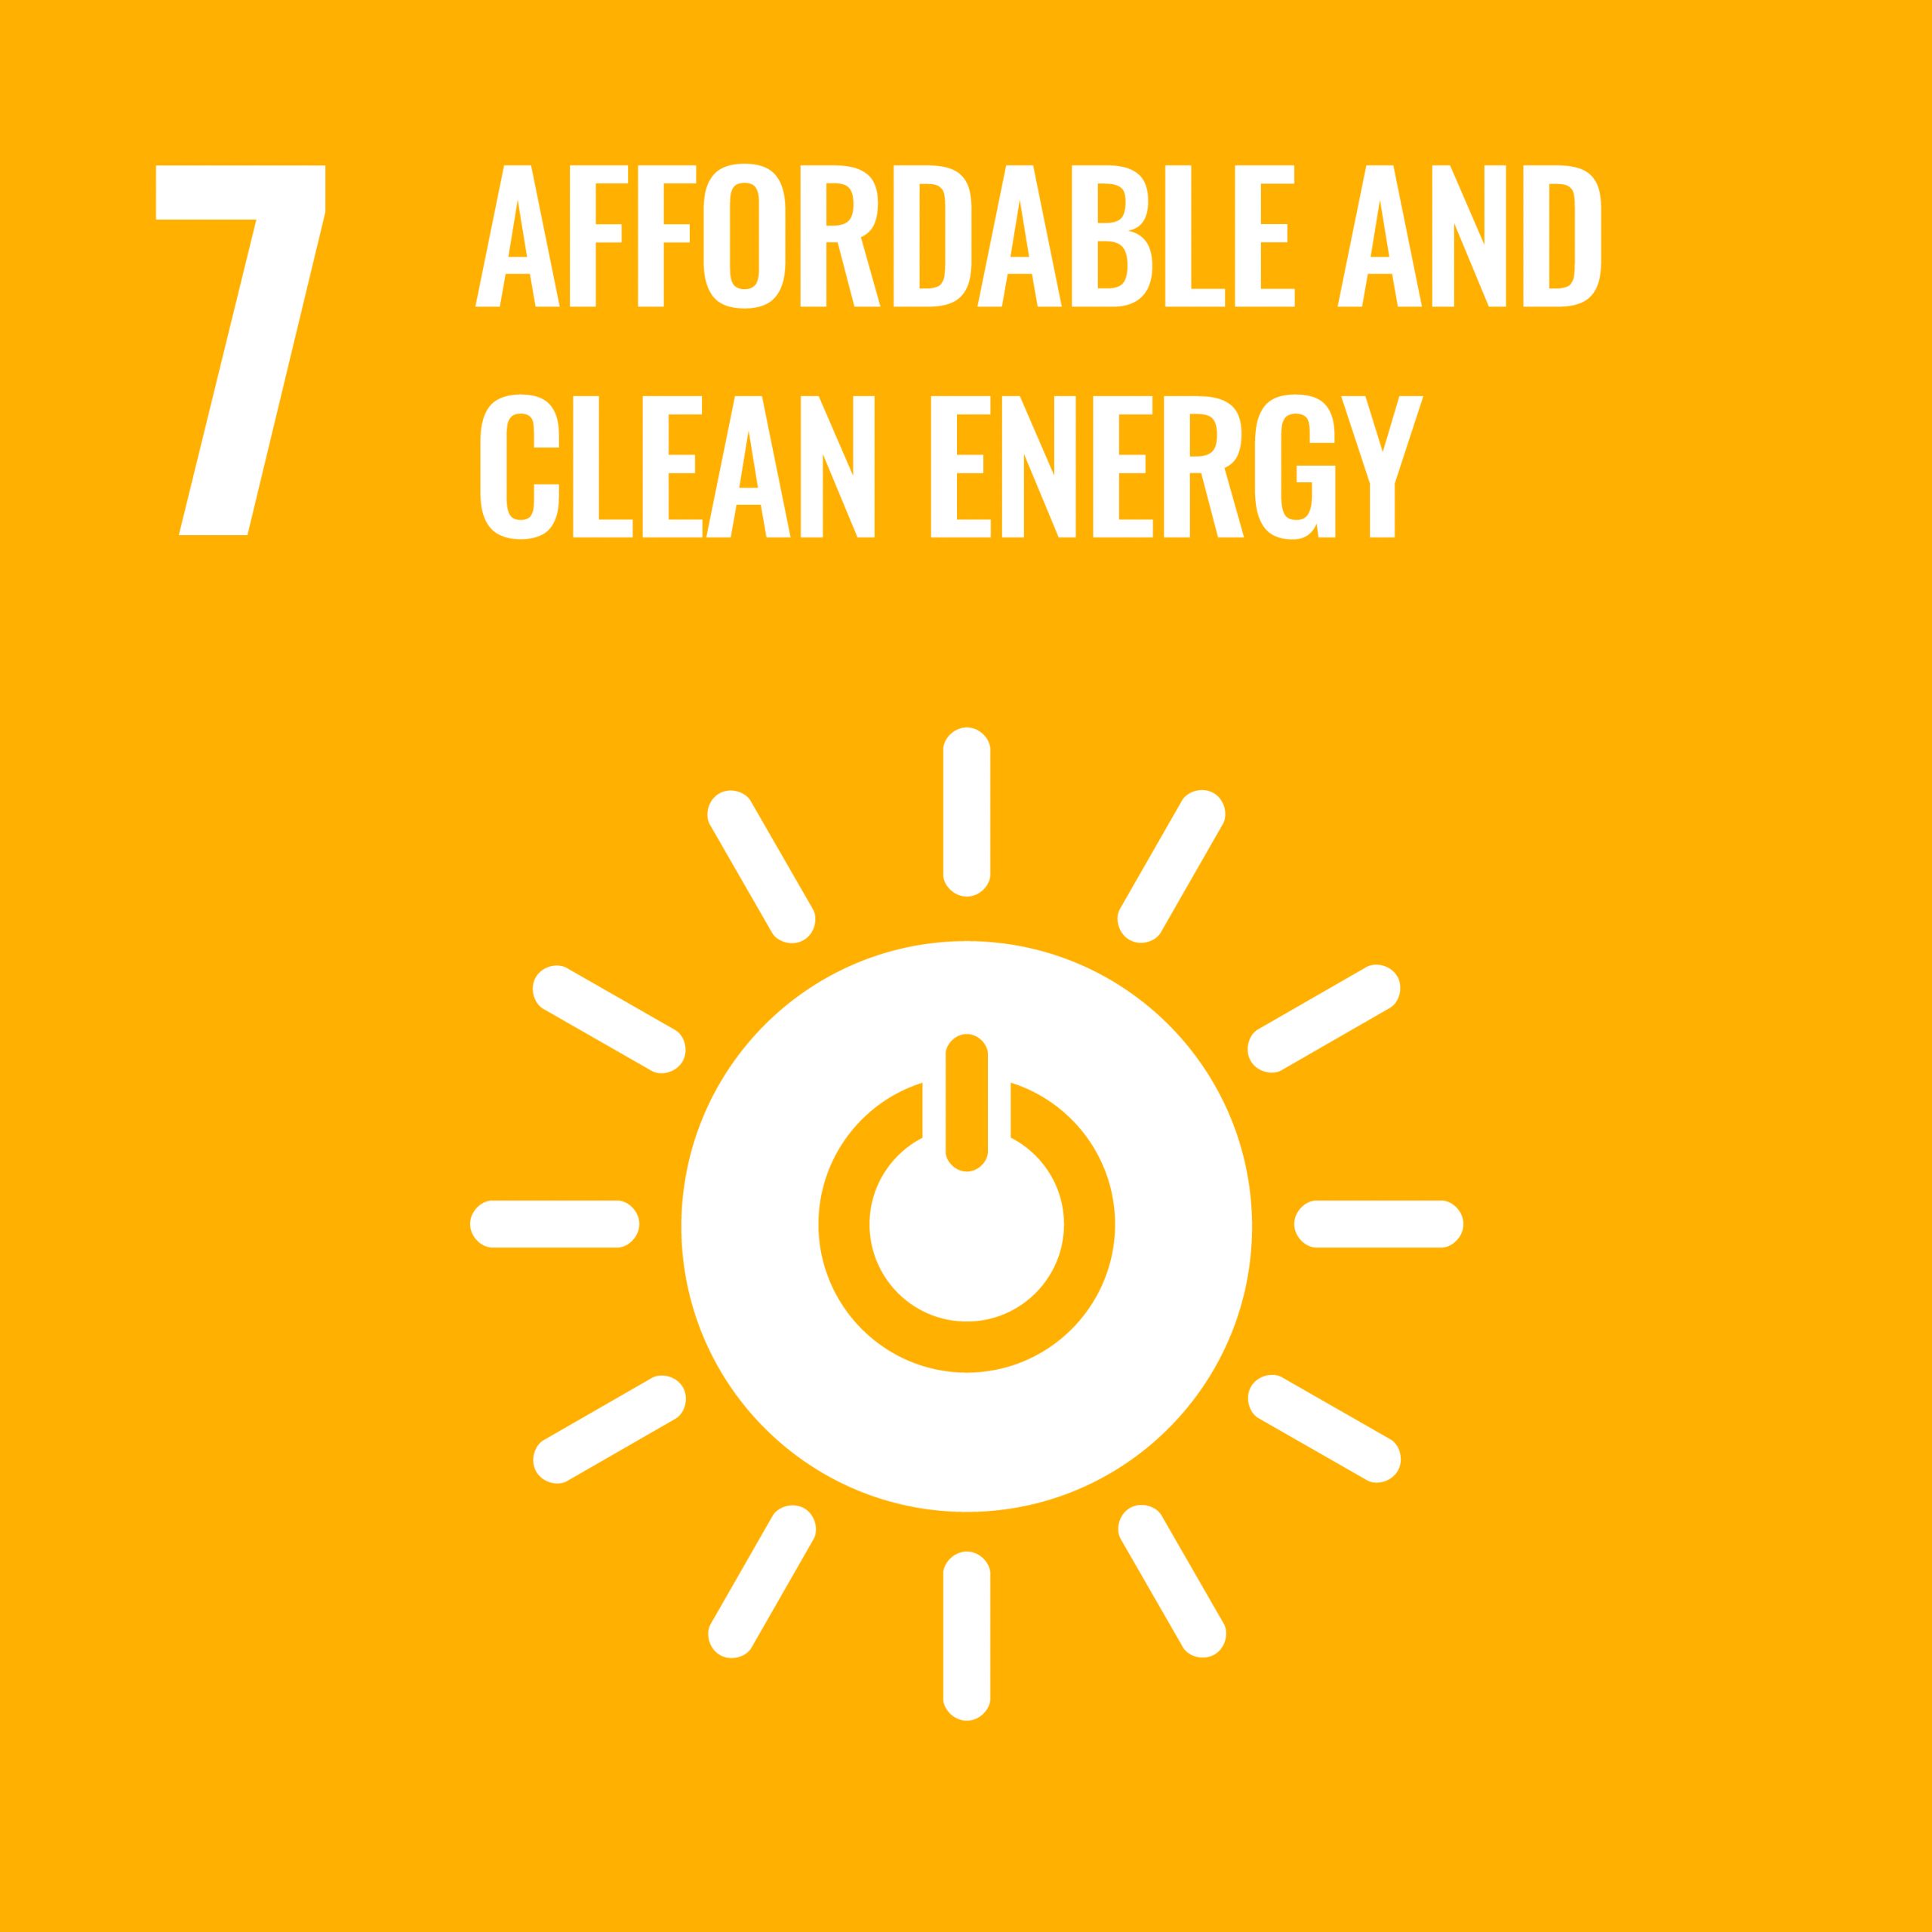 Affordable and clean energy - SDG 7